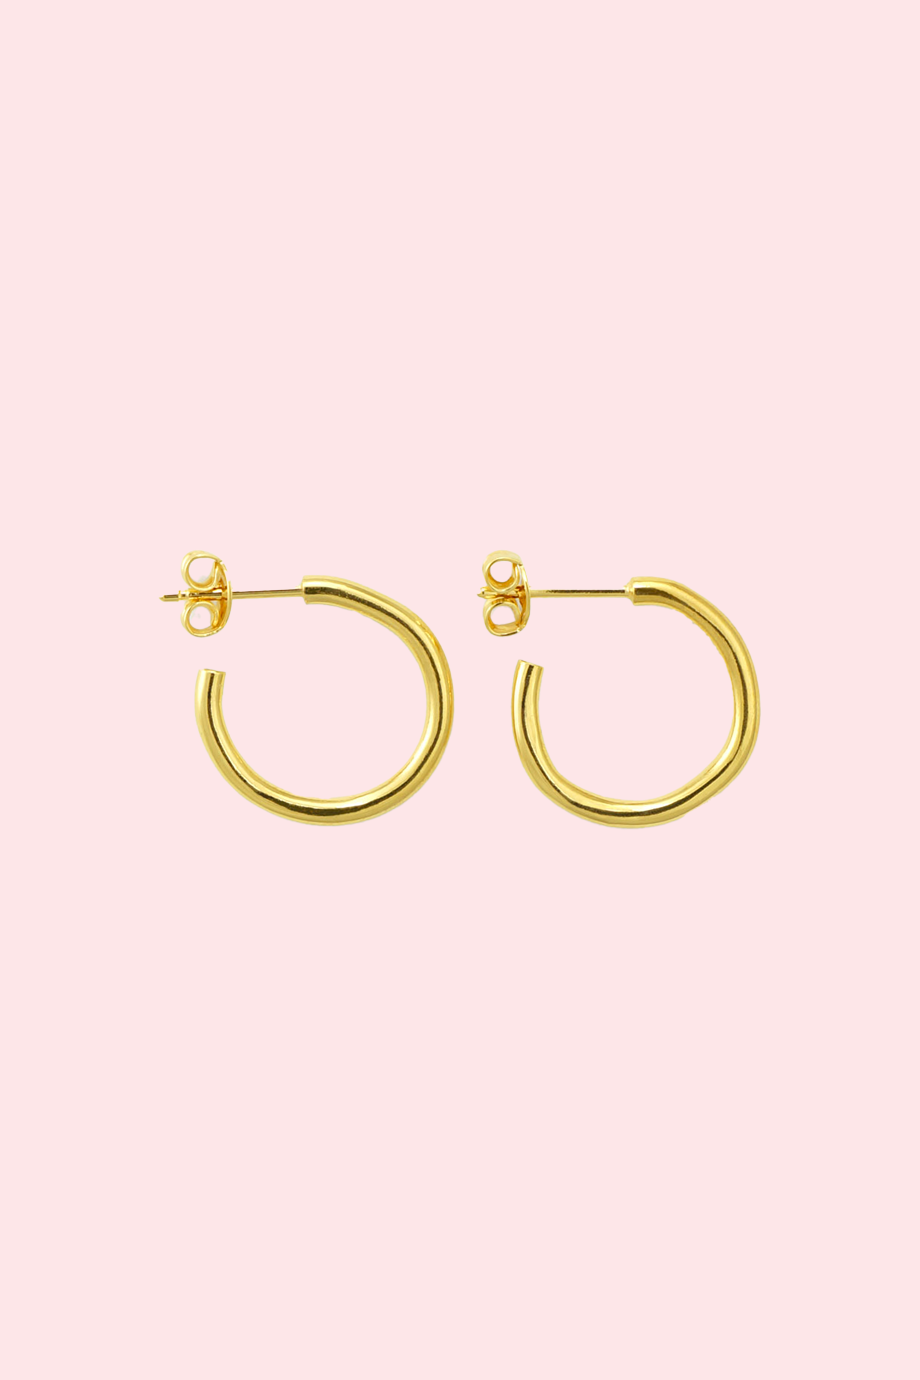 Martine Viergever earrings Trochus small goldplated silver